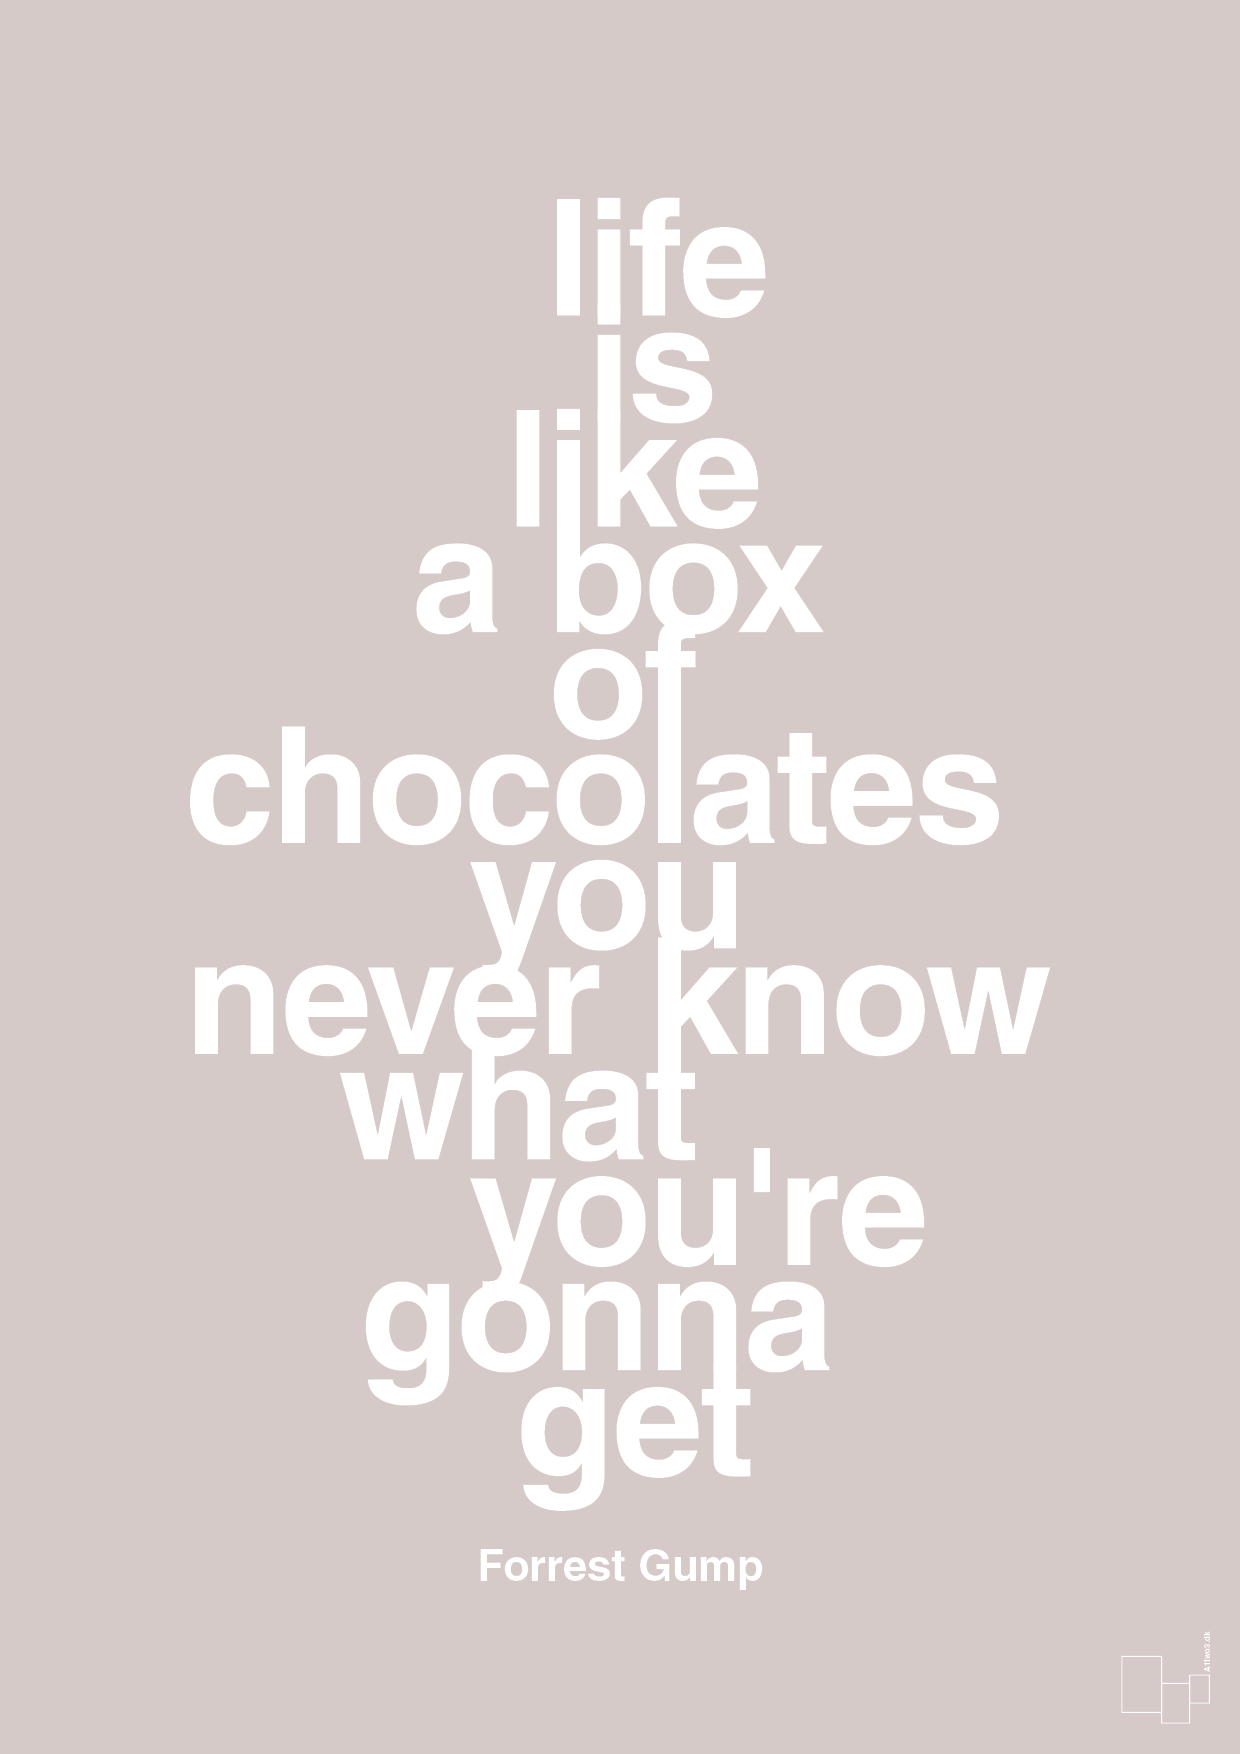 life is like a box of chocolates you never know what you're gonna get - Plakat med Citater i Broken Beige